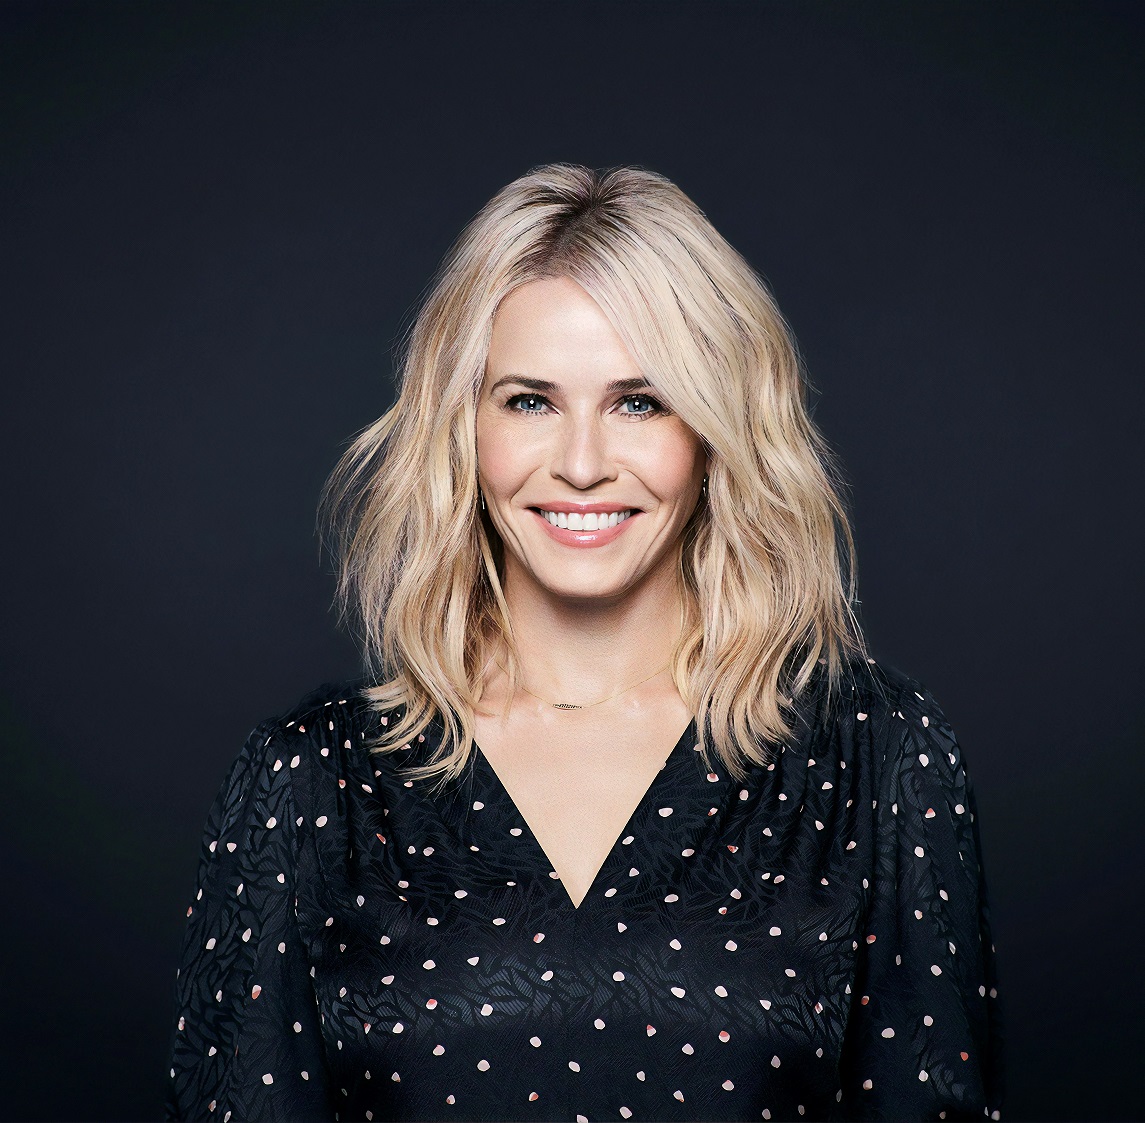 AN INTIMATE NIGHT OF STAND-UP COMEDY WITH CHELSEA HANDLER